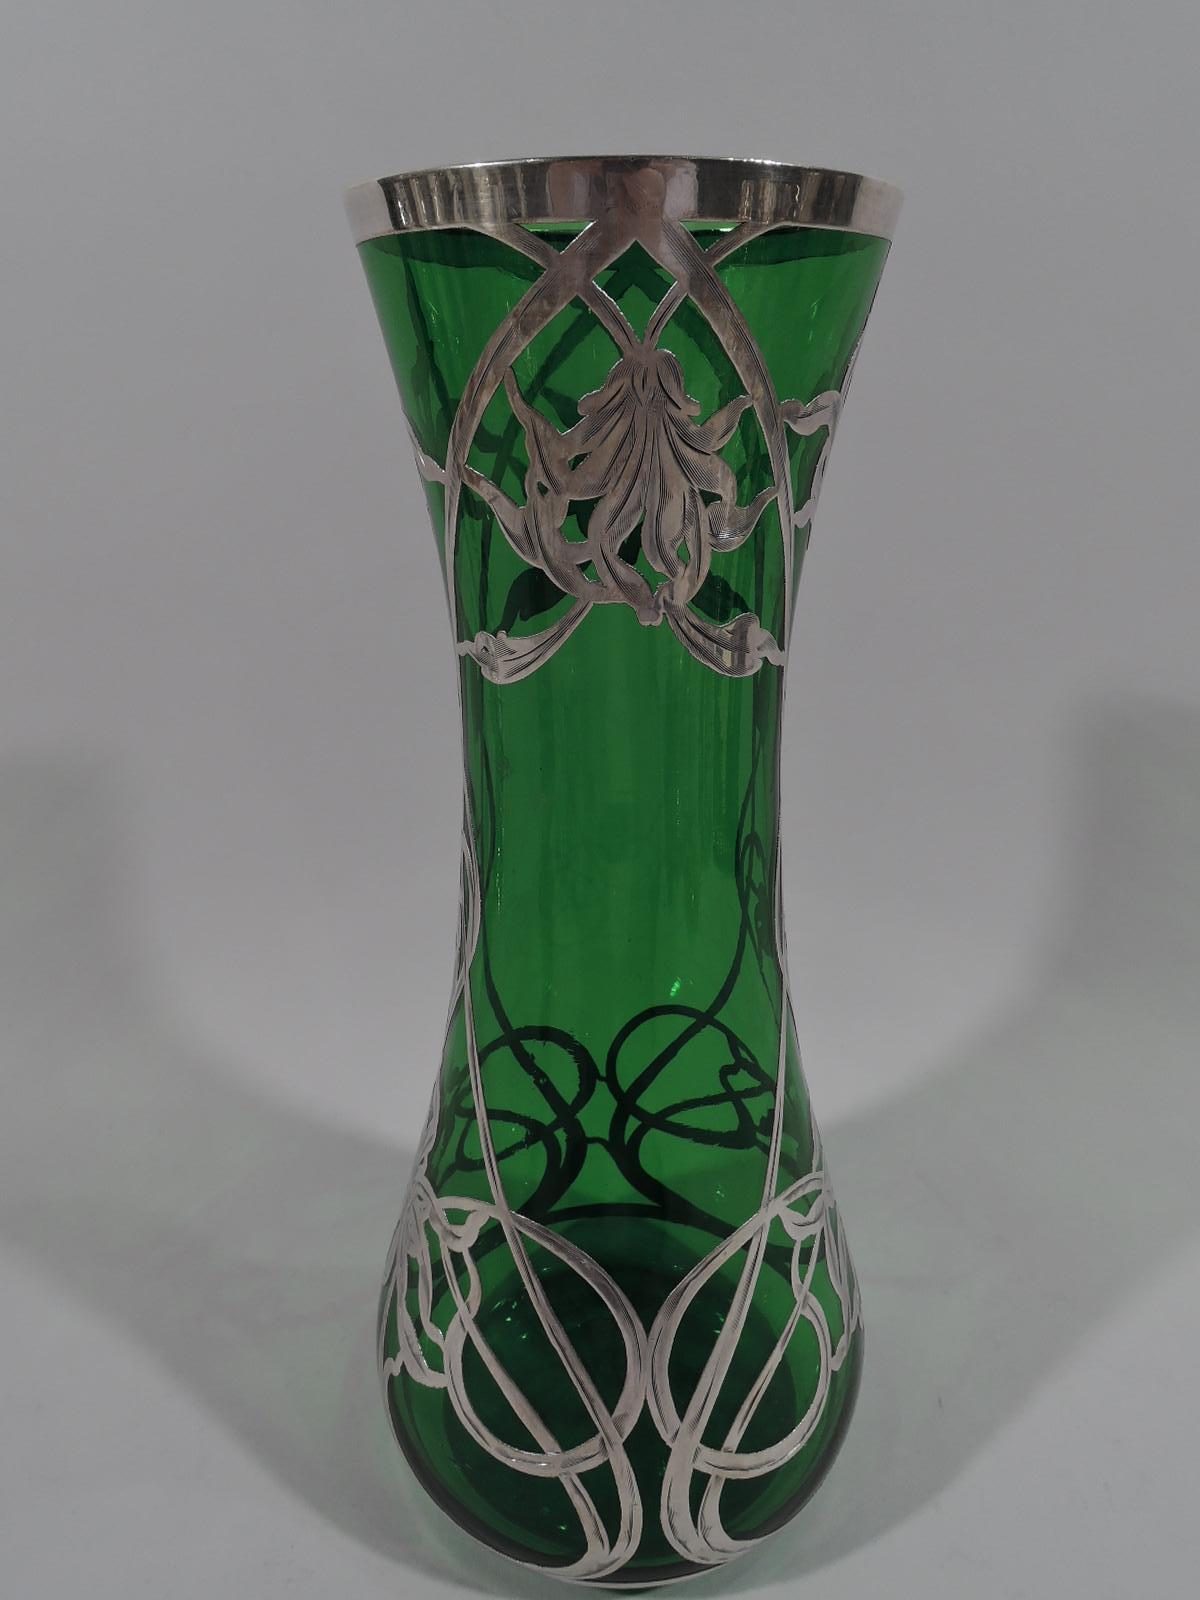 Turn-of-the-century American Art Nouveau green glass vase with engraved silver overlay. Cylindrical with spread bottom. Loose and open overlay with floaty irregular flower heads and interlaced whiplash tendrils.